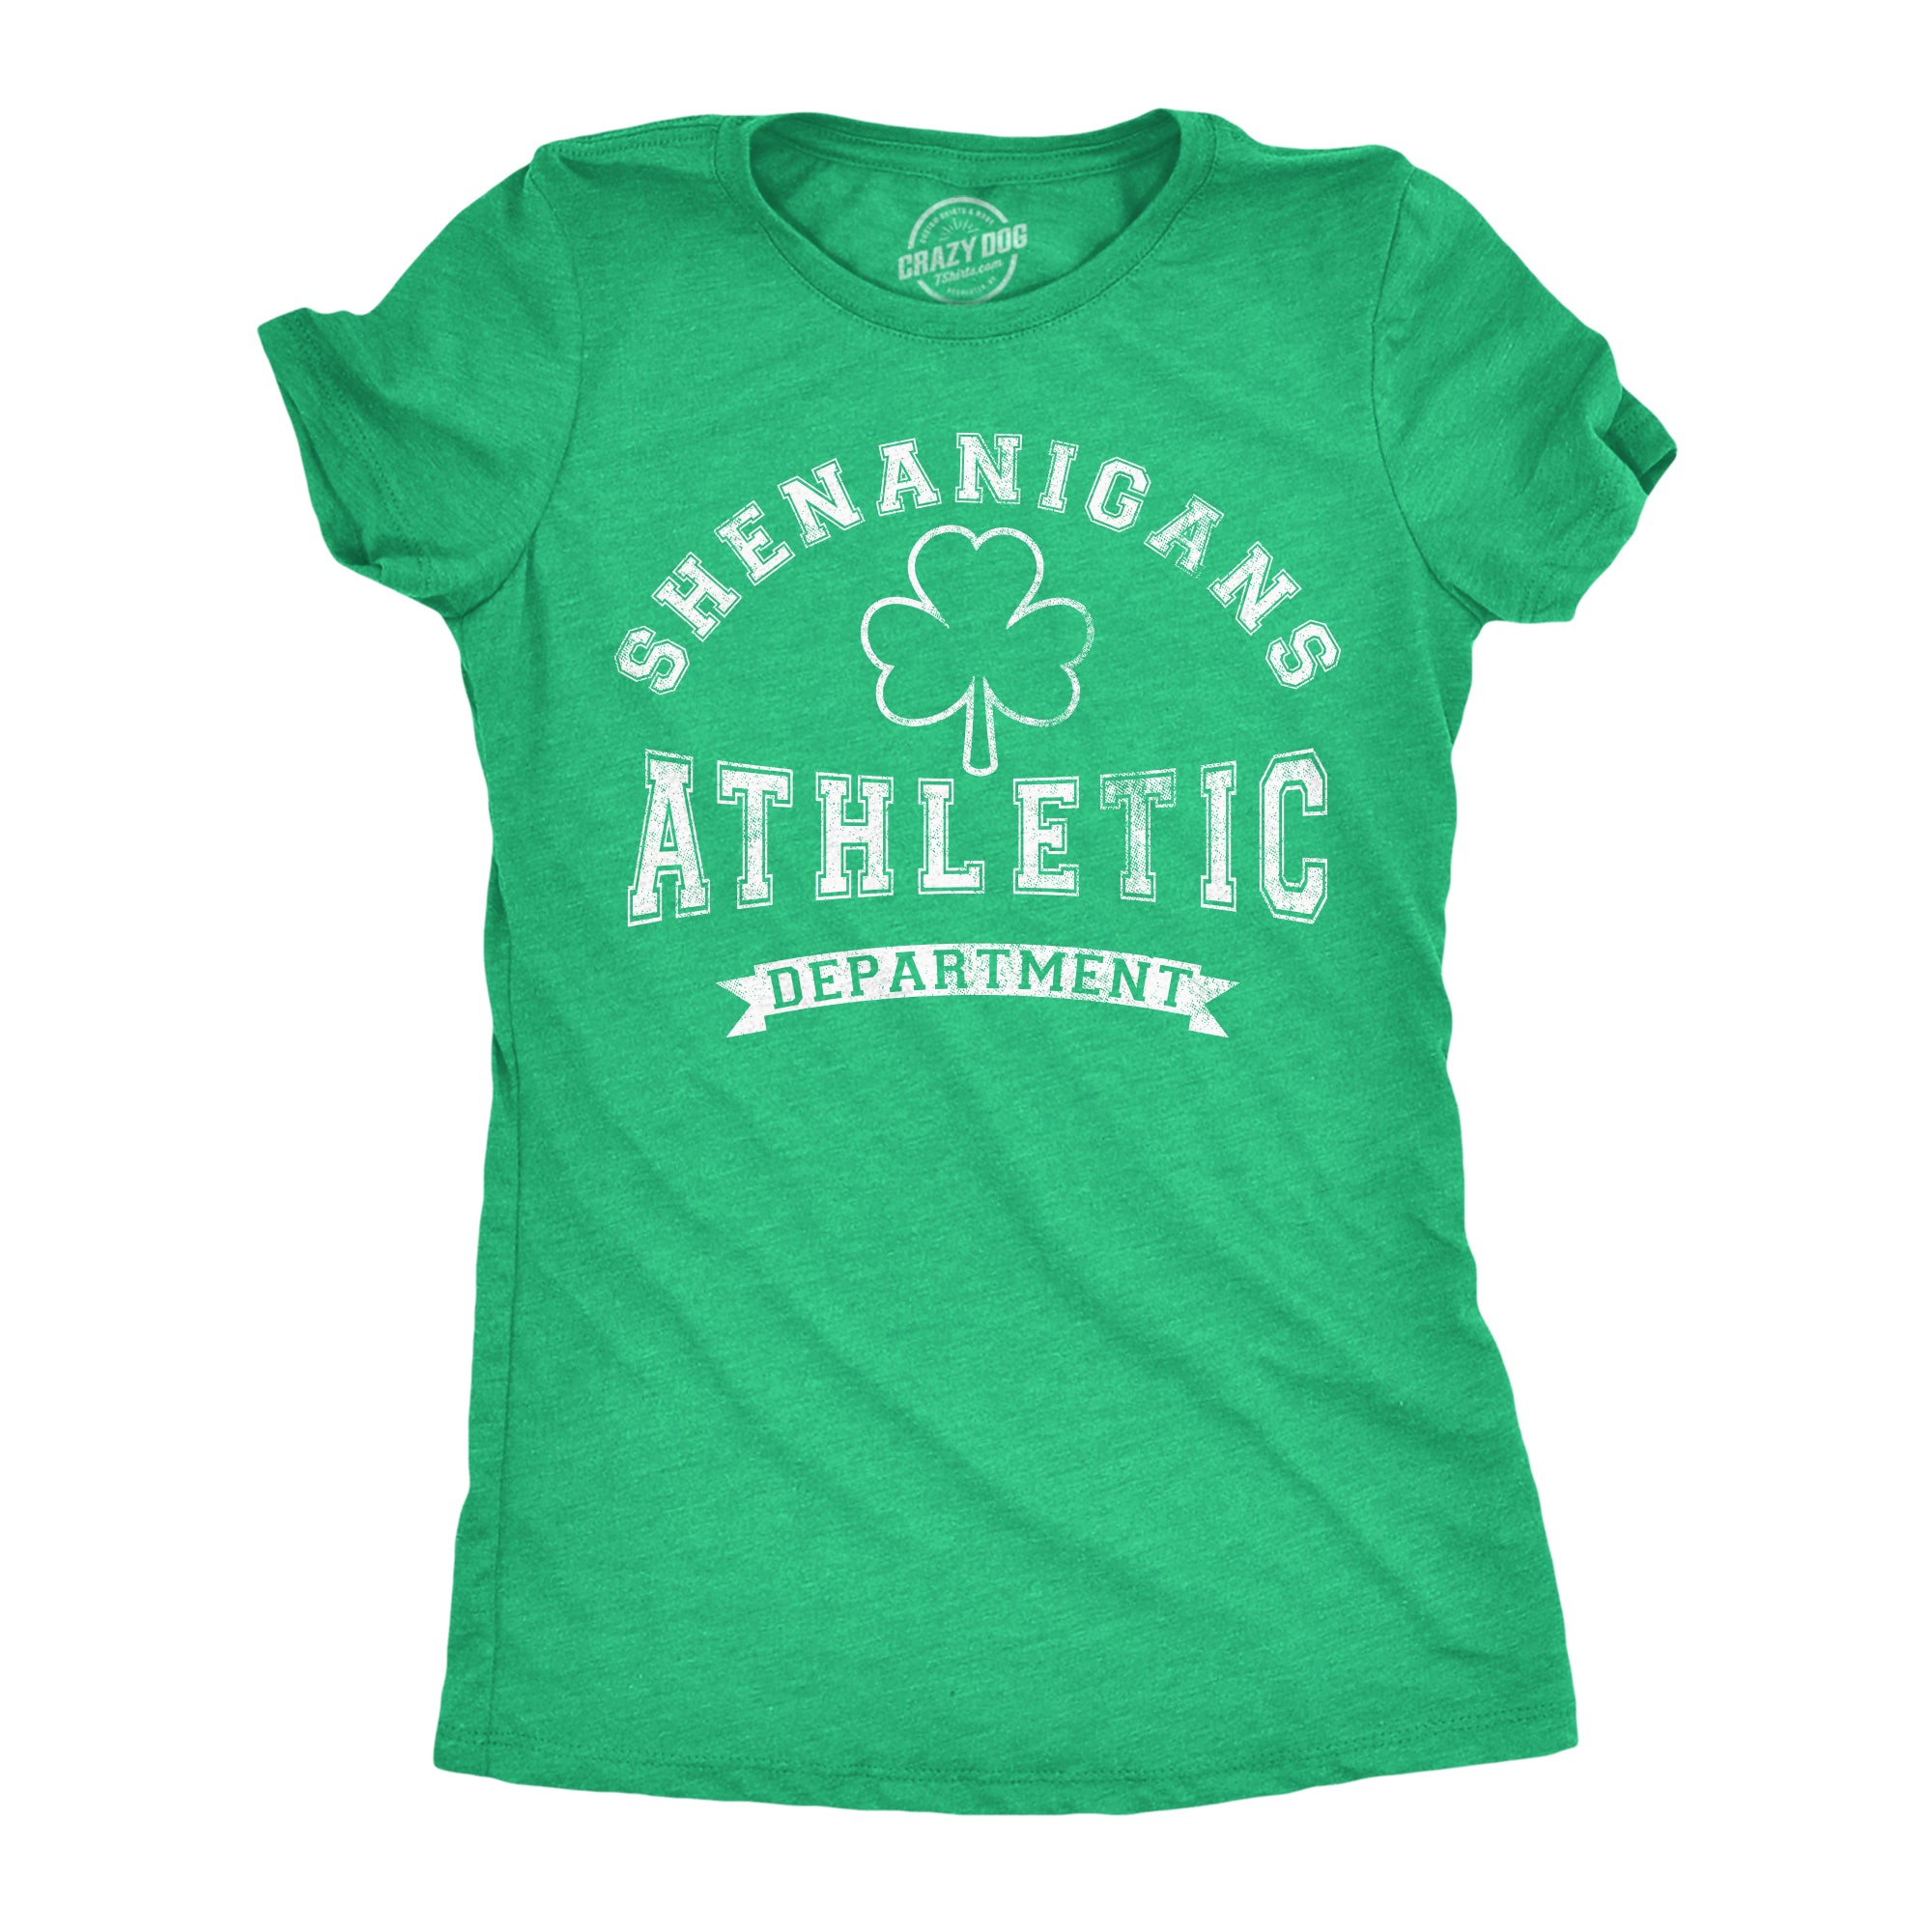 Funny Heather Green - Shenanigans Athletic Dept Shenanigans Athletic Department Womens T Shirt Nerdy Saint Patrick's Day Sarcastic Tee